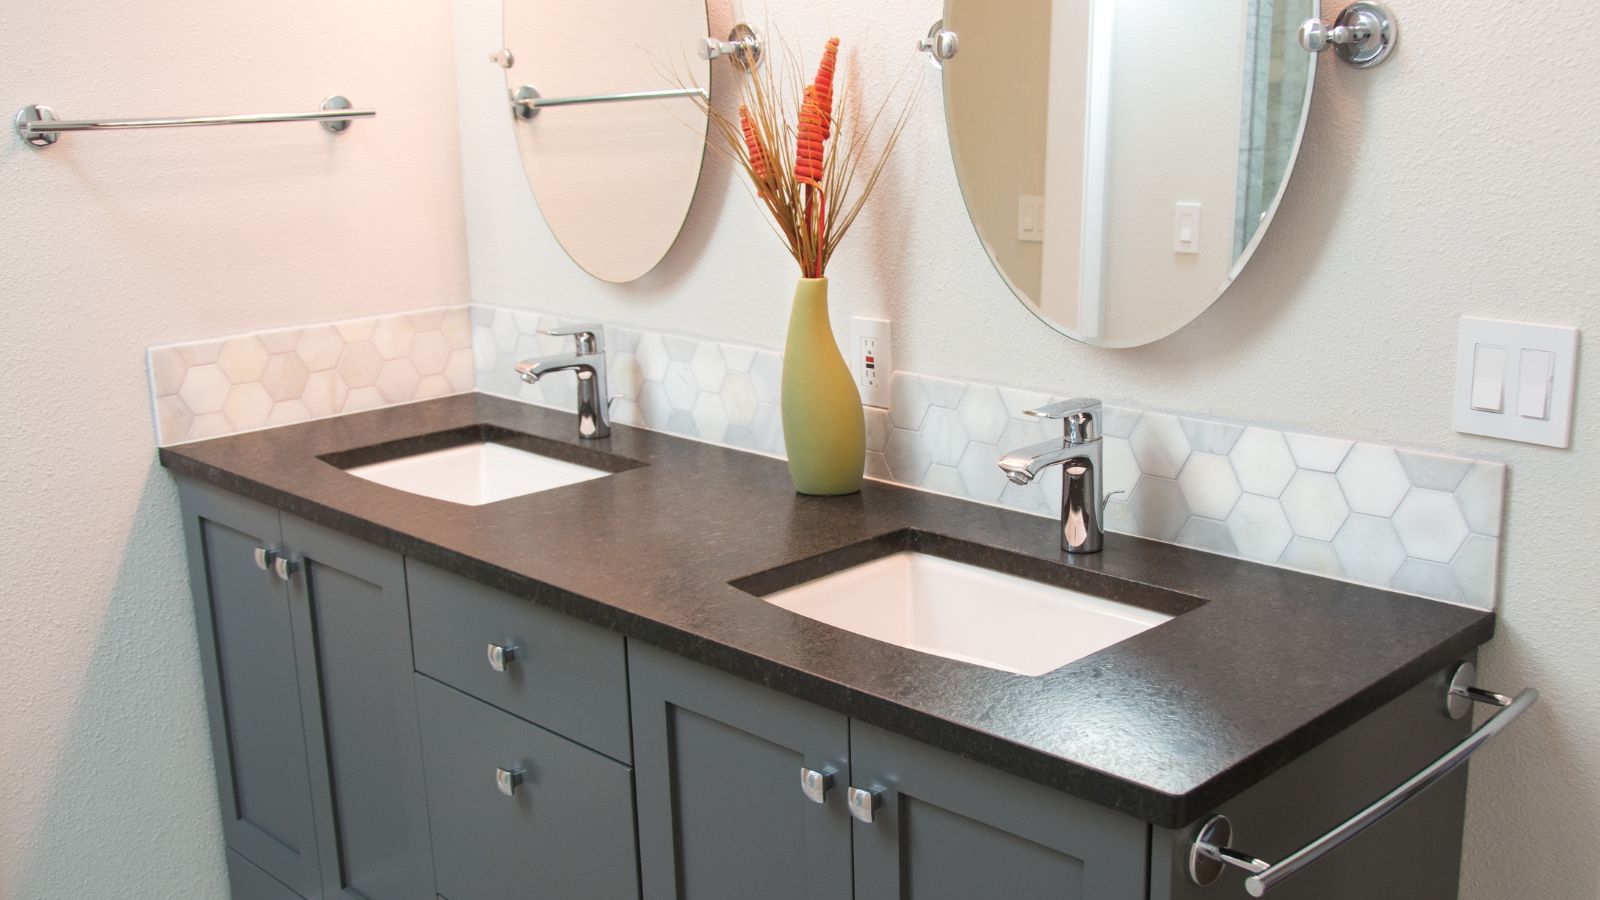 How to Choose a Double Vanity for Your Small Bathroom
